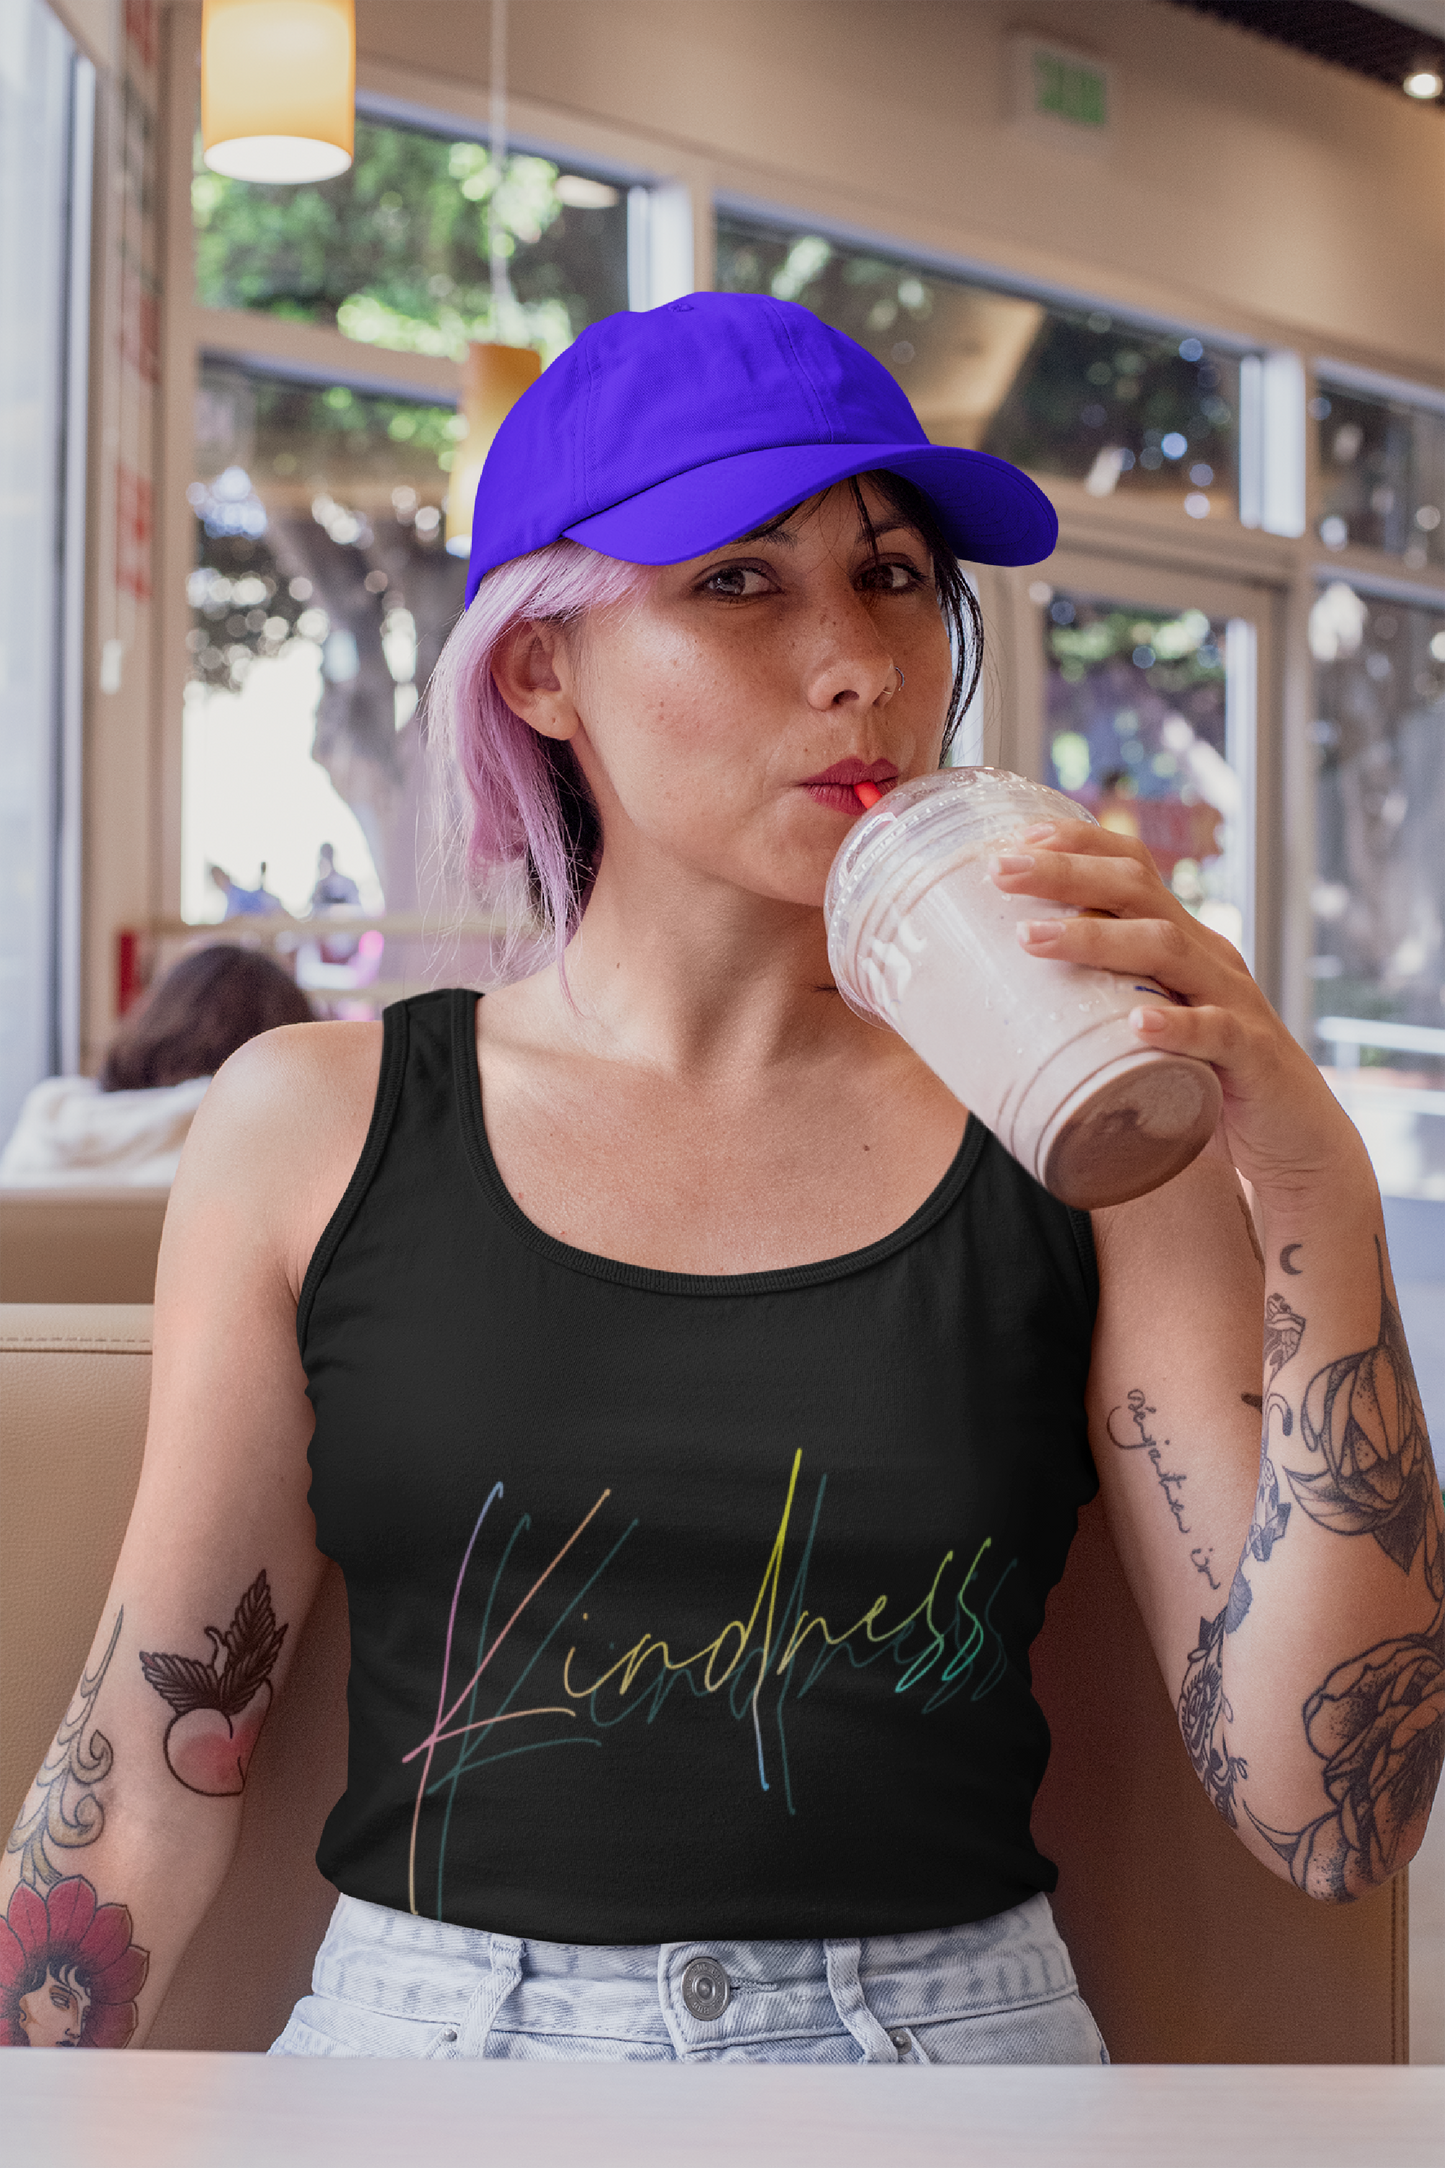 Kindness Tank, Kindness Inspirational Tank, Positive Quote Shirt For Women, Tank That Warm The Heart